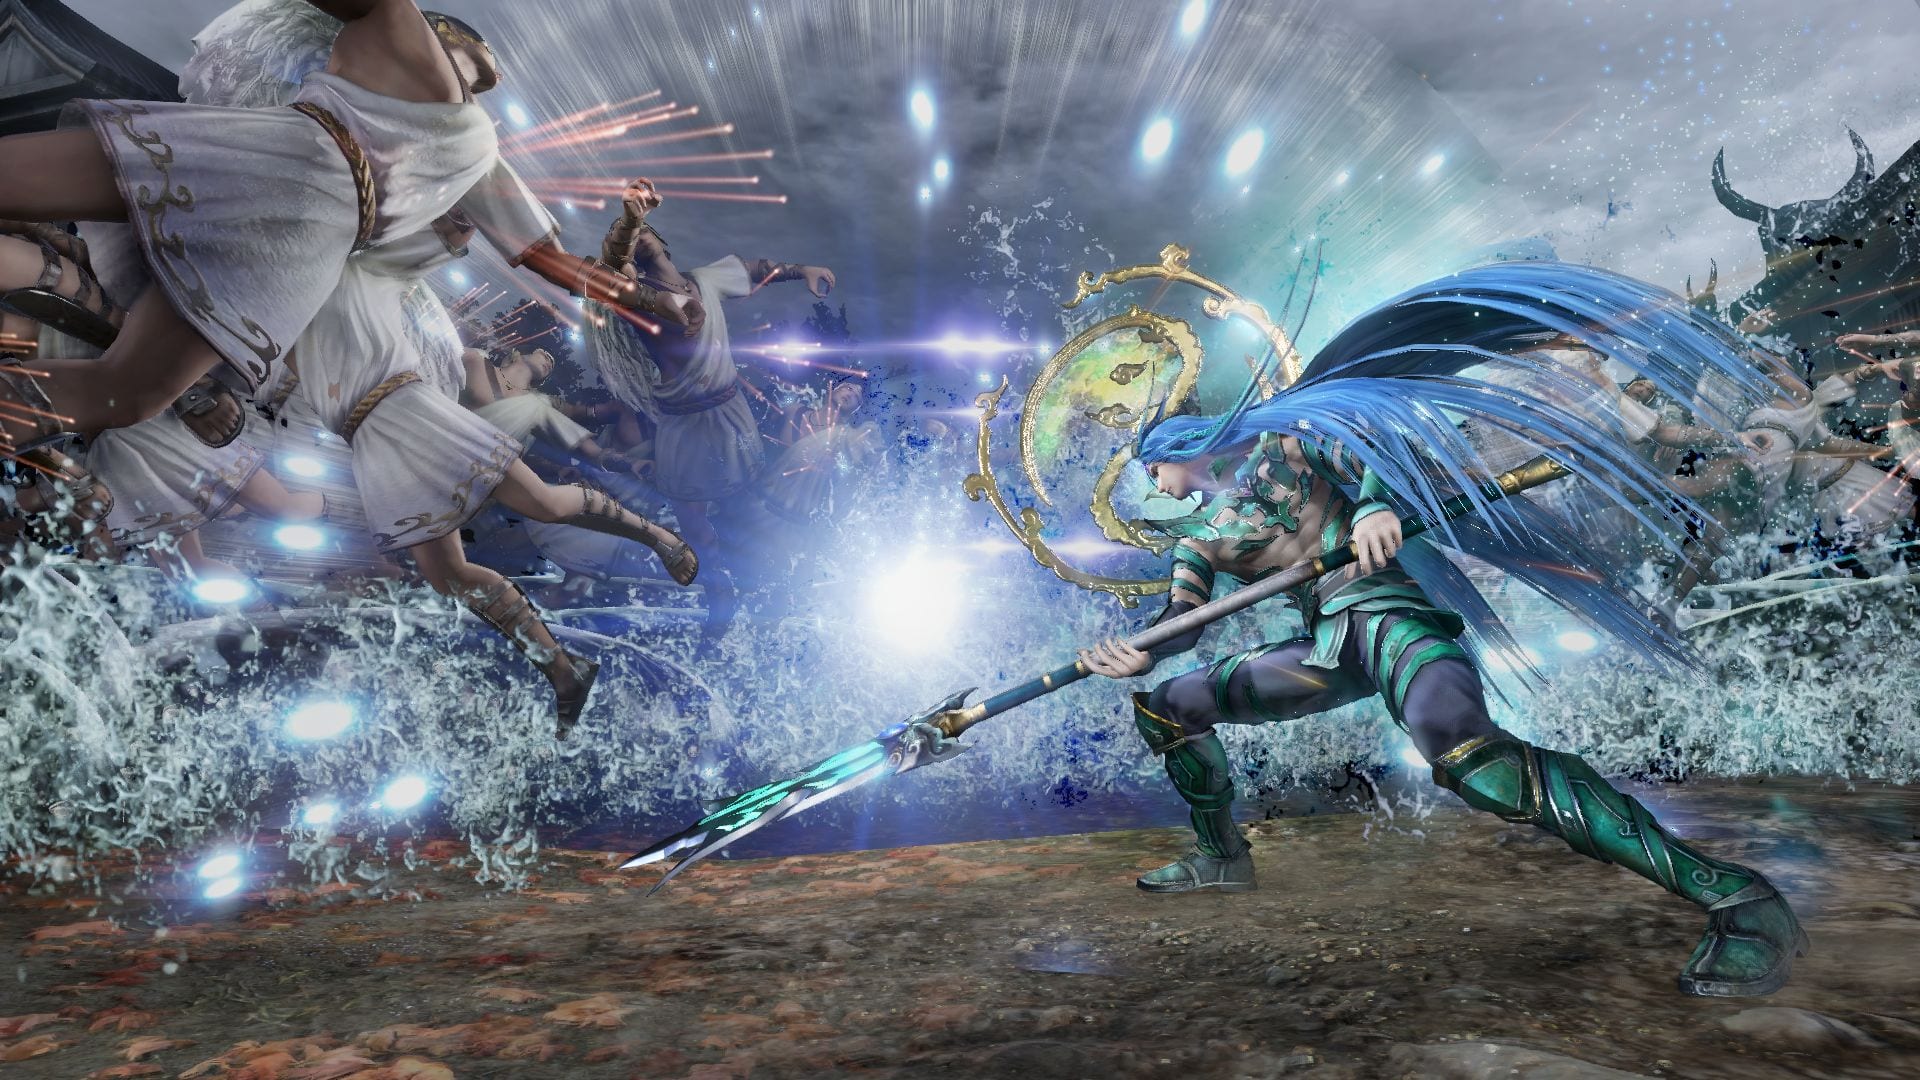 warriors-orochi-4-ultimate-gets-new-screenshots-and-details-about-infinity-mode-and-yang-jian